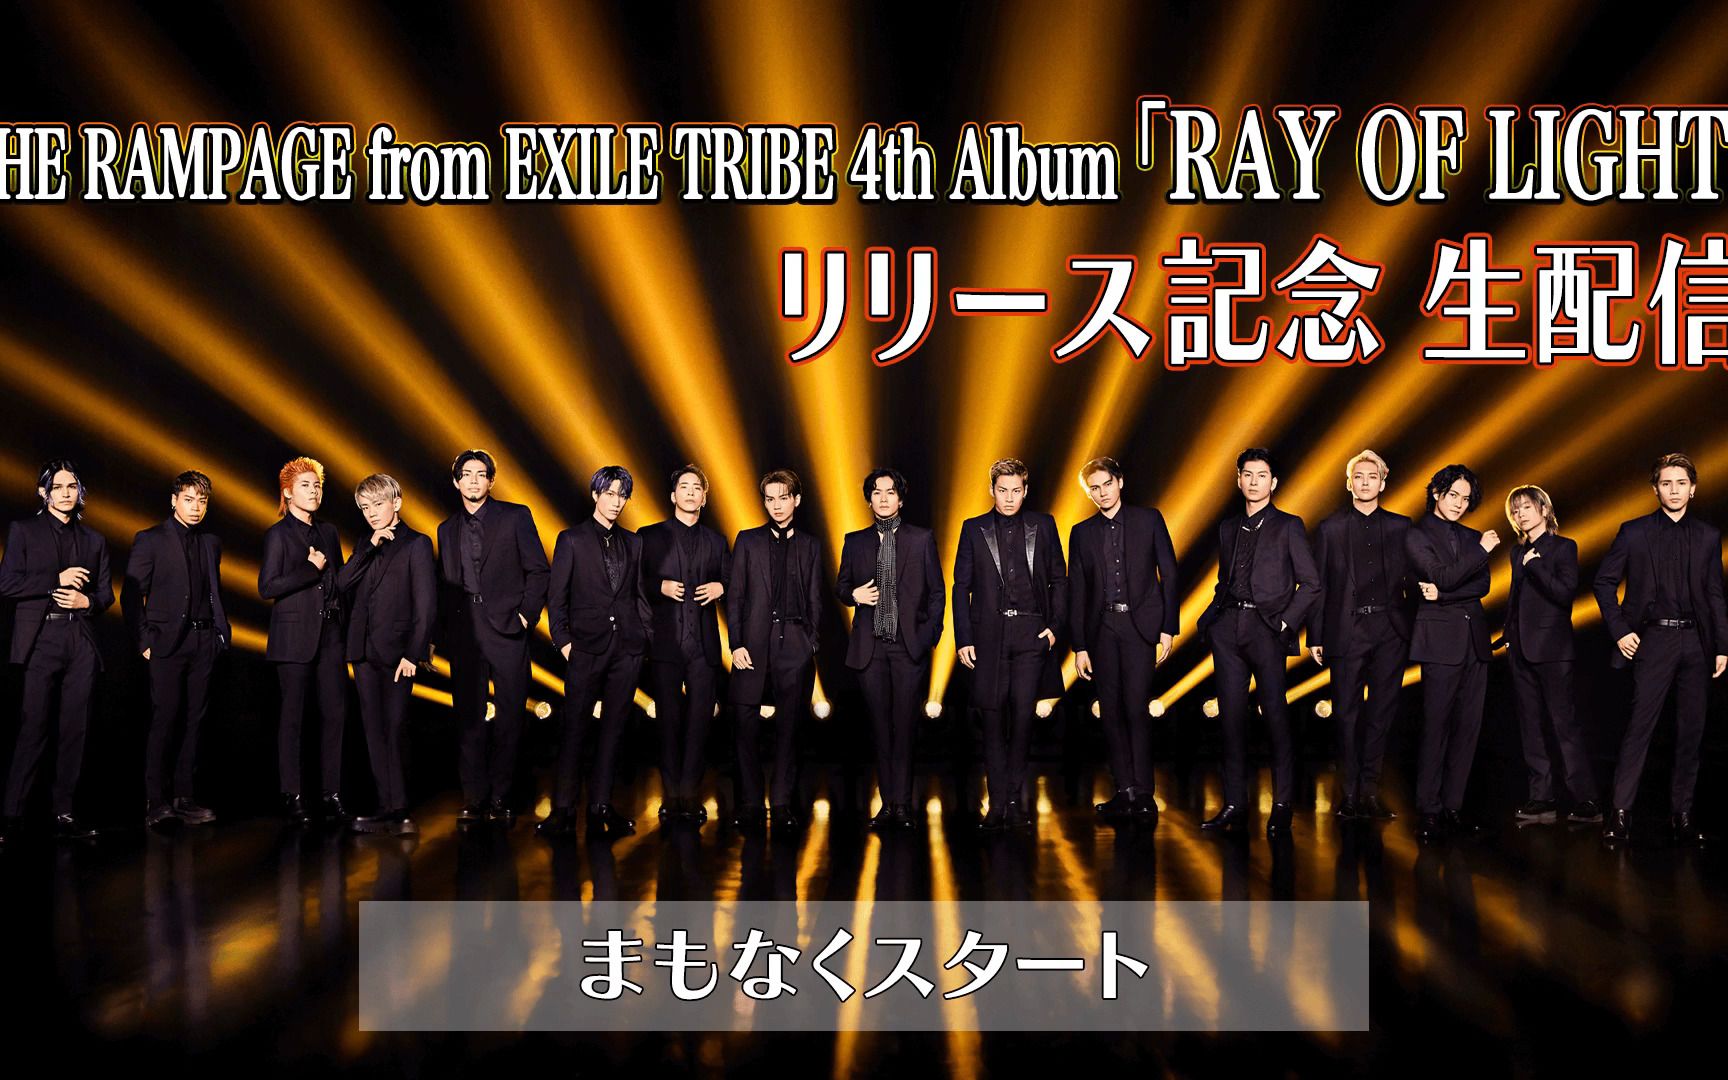 THE RAMPAGE from EXILE TRIBE 4th Album「RAY OF LIGHT」リリース記念生配信！-哔哩哔哩